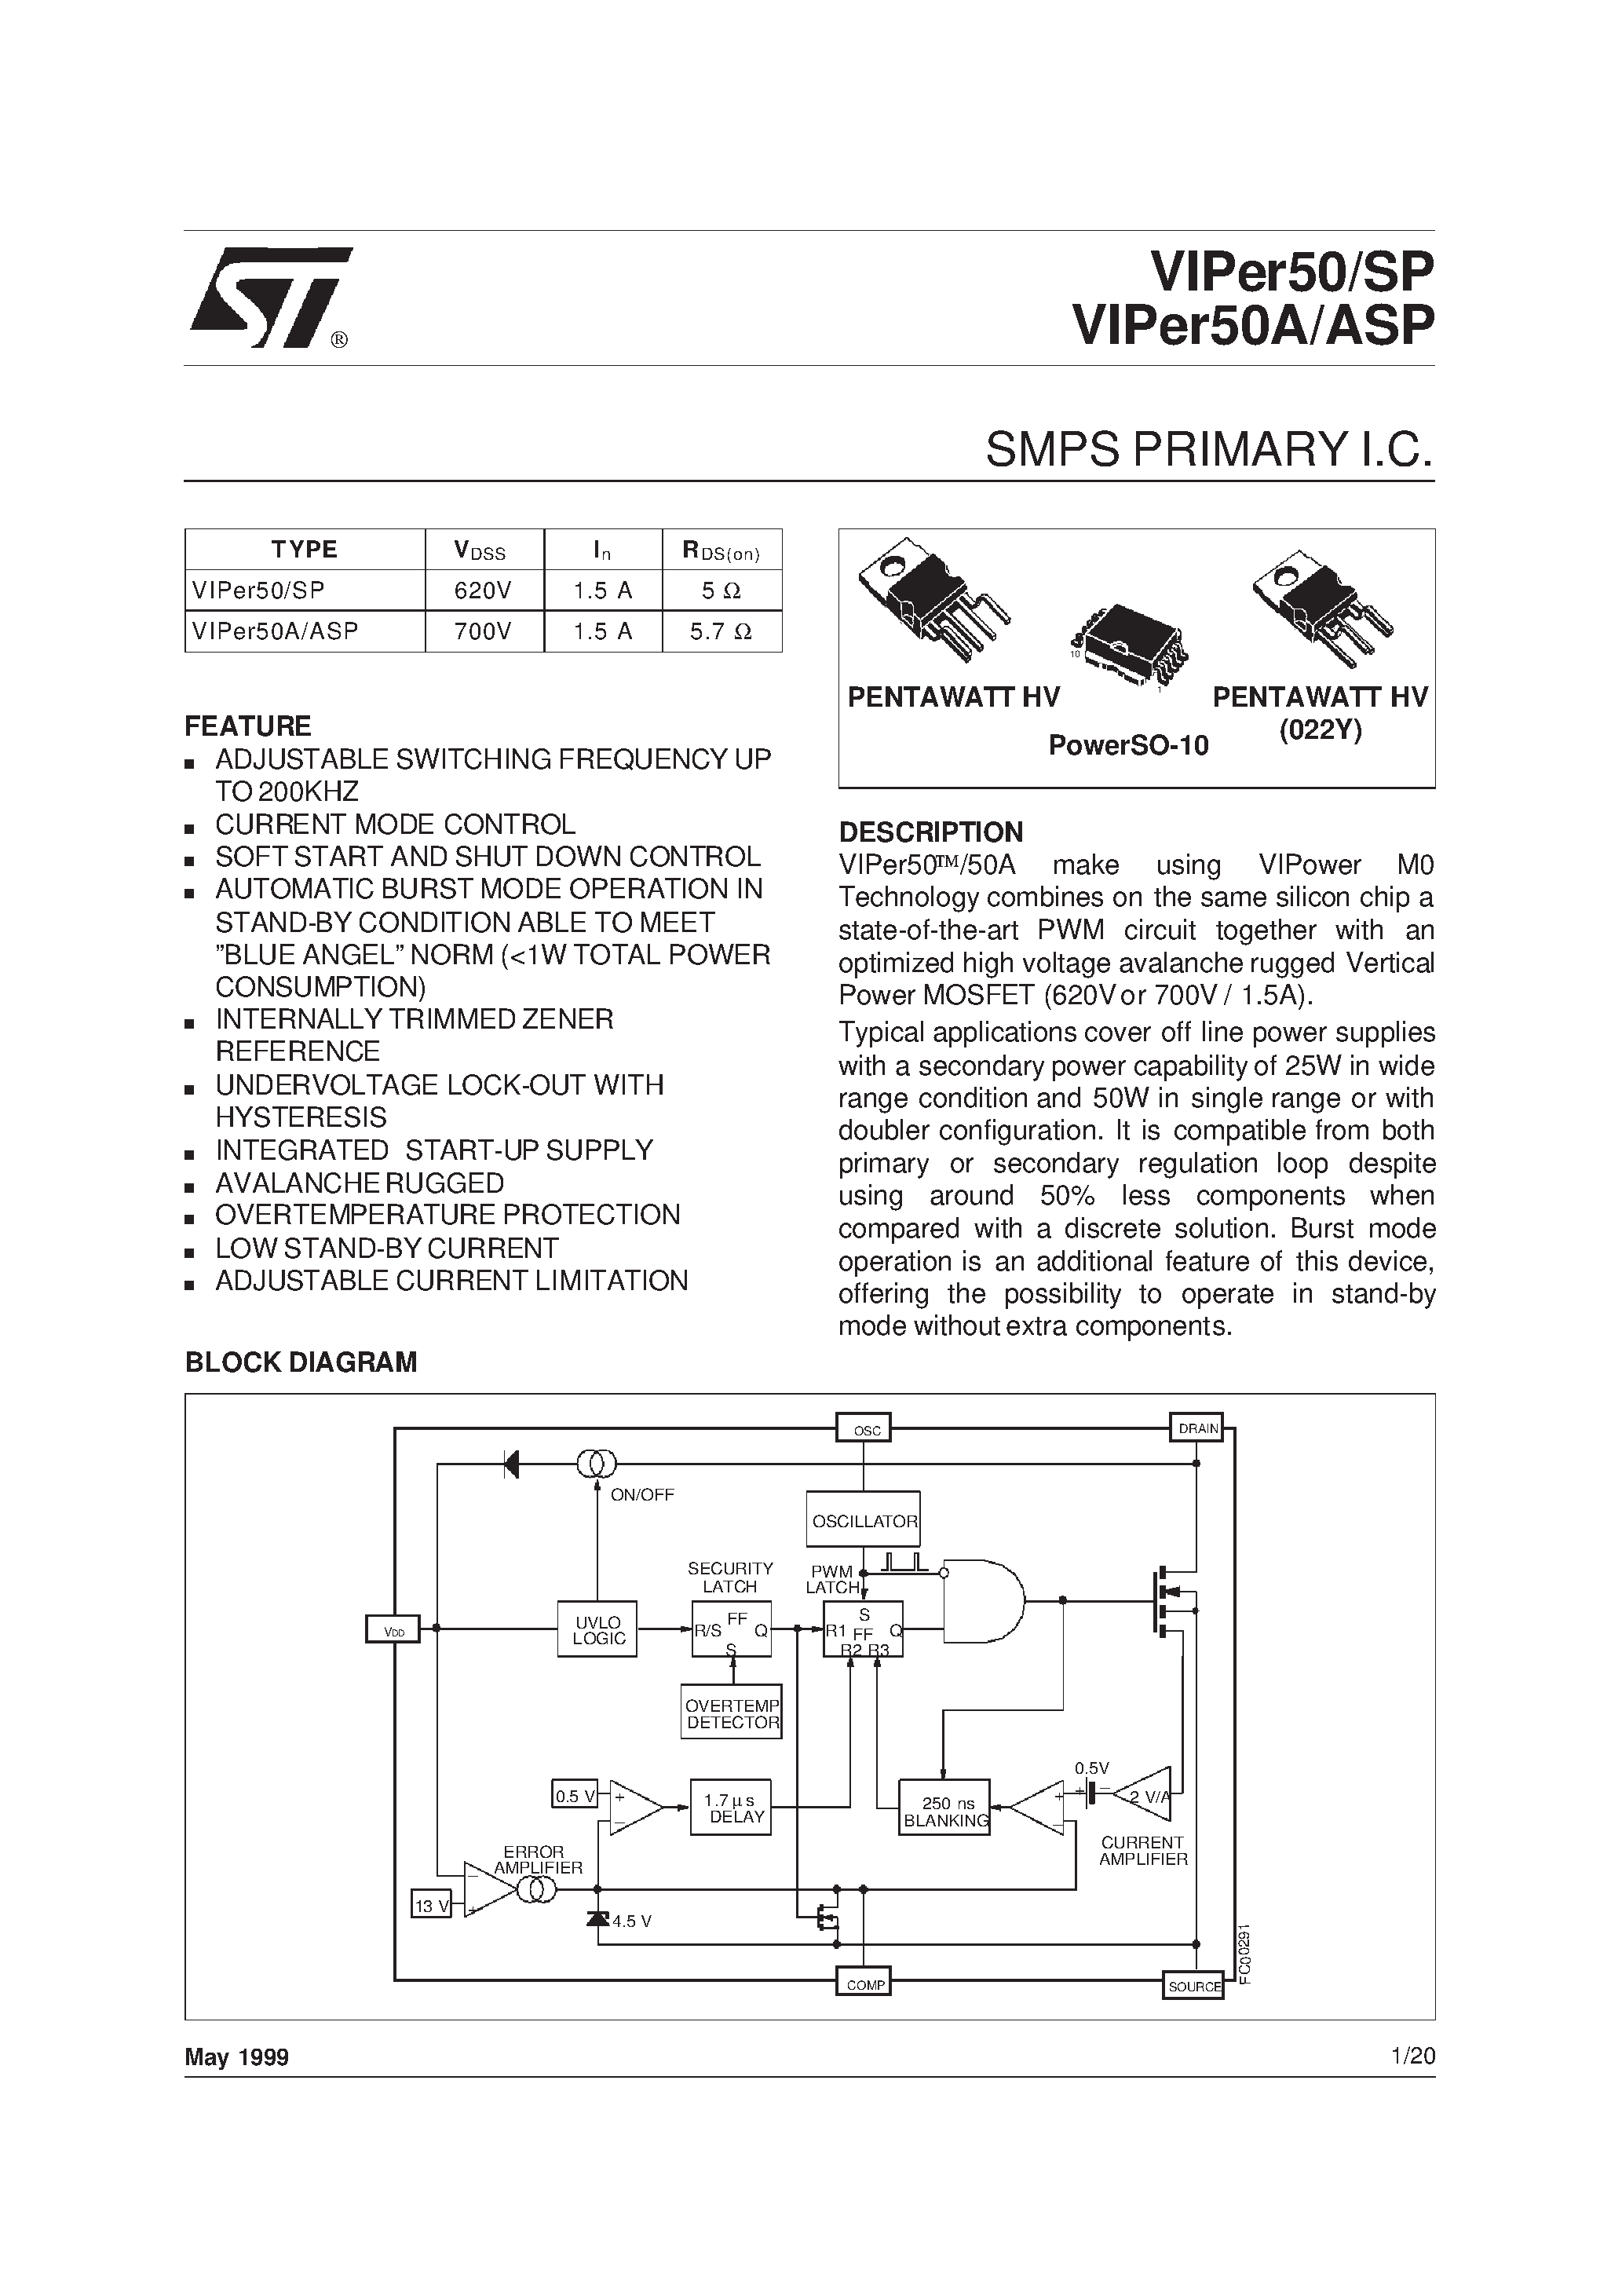 Datasheet VIPer50SP - SMPS PRIMARY I.C. page 1